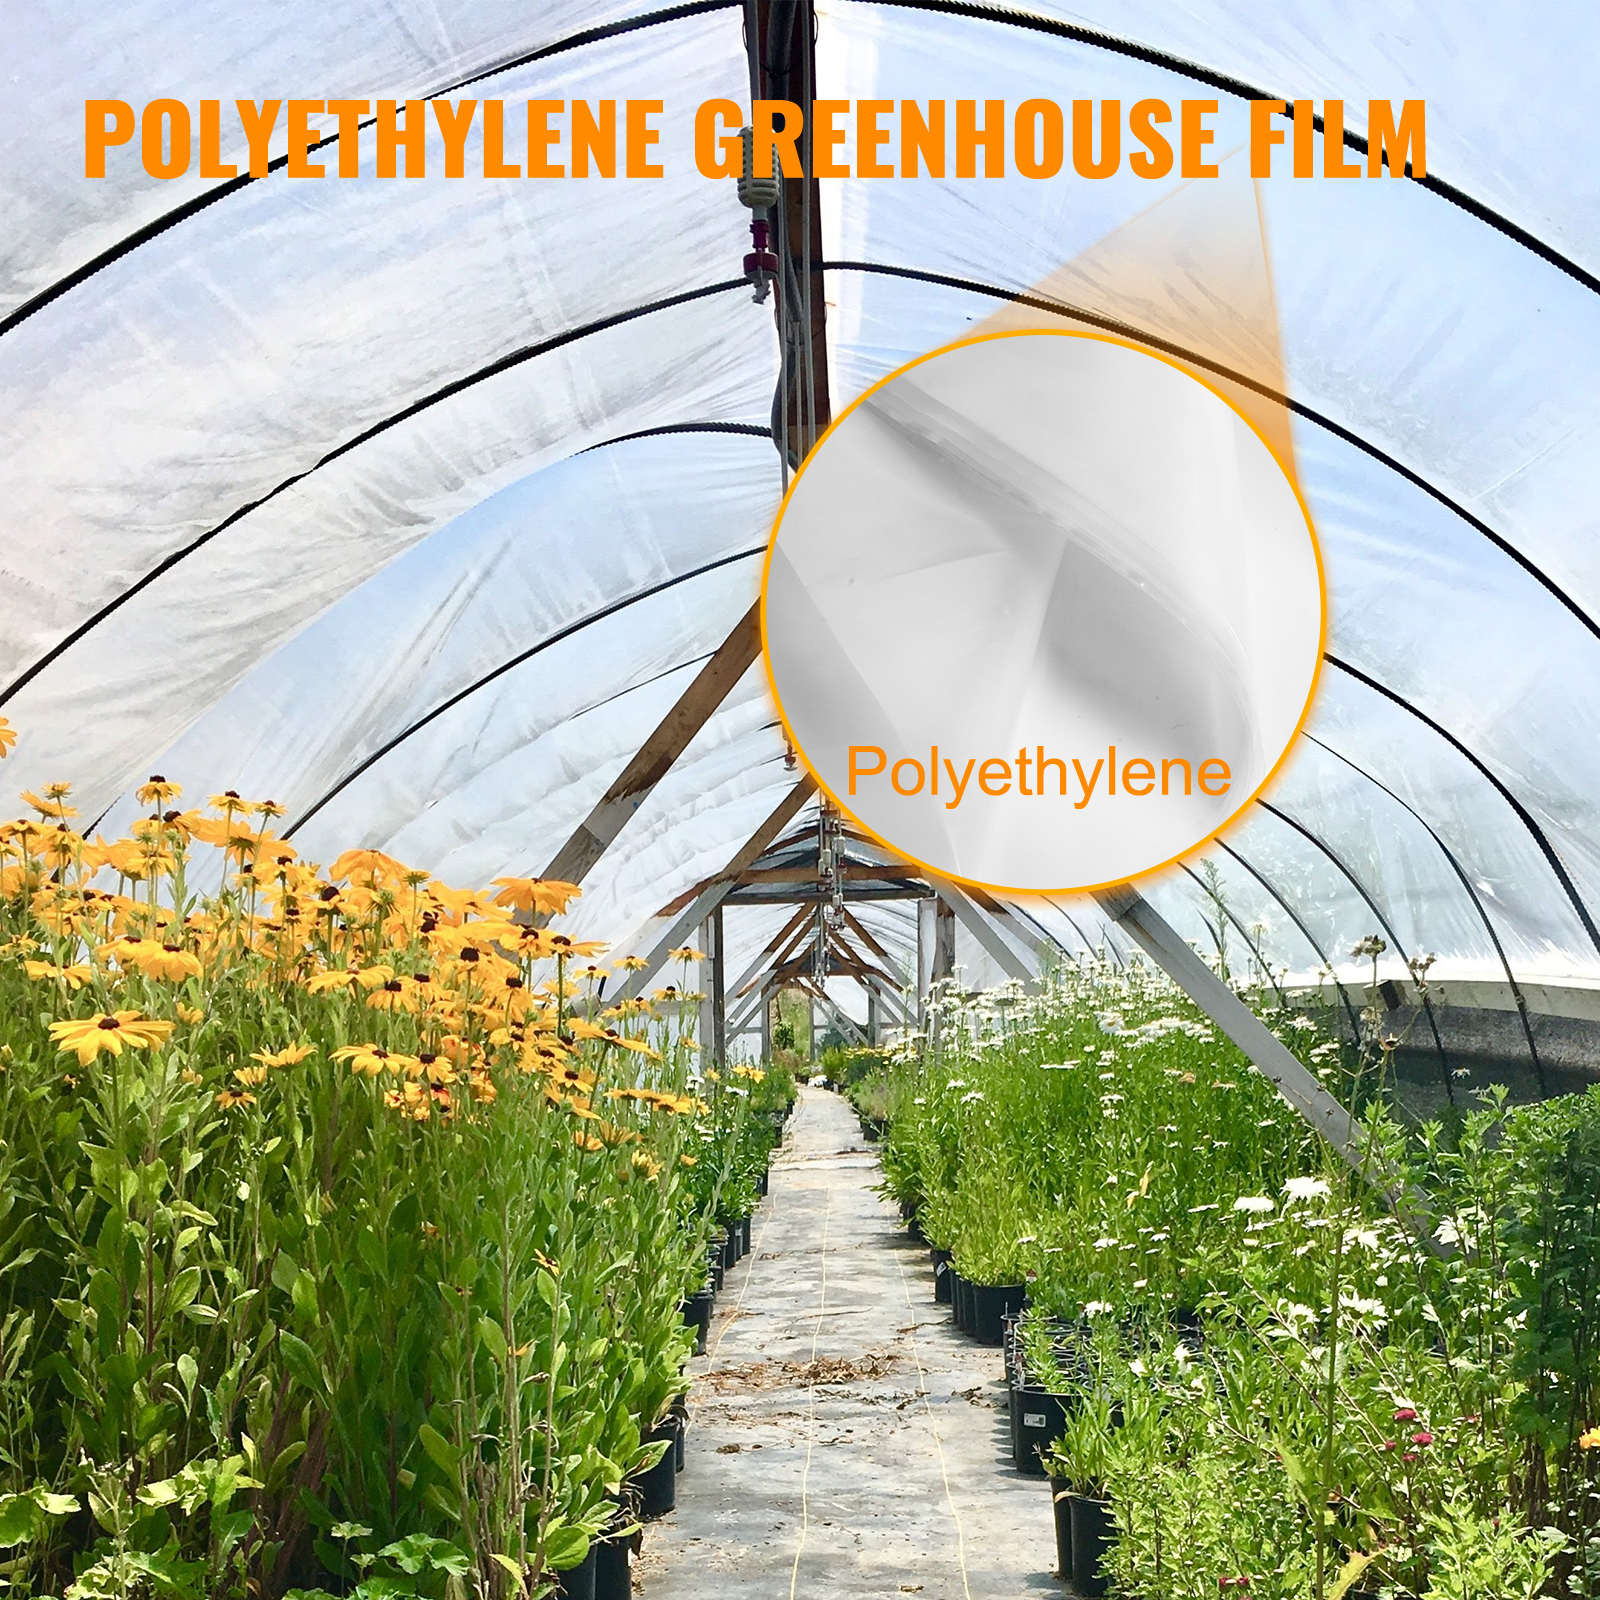 Farming 26' x 32' Agriculture Clear Greenhouse Plastic Sheeting Farm Plastic Supply 8 mil - Ultra Durable - 4 Year UV Resistant Polyethylene Greenhouse Film for Gardening 